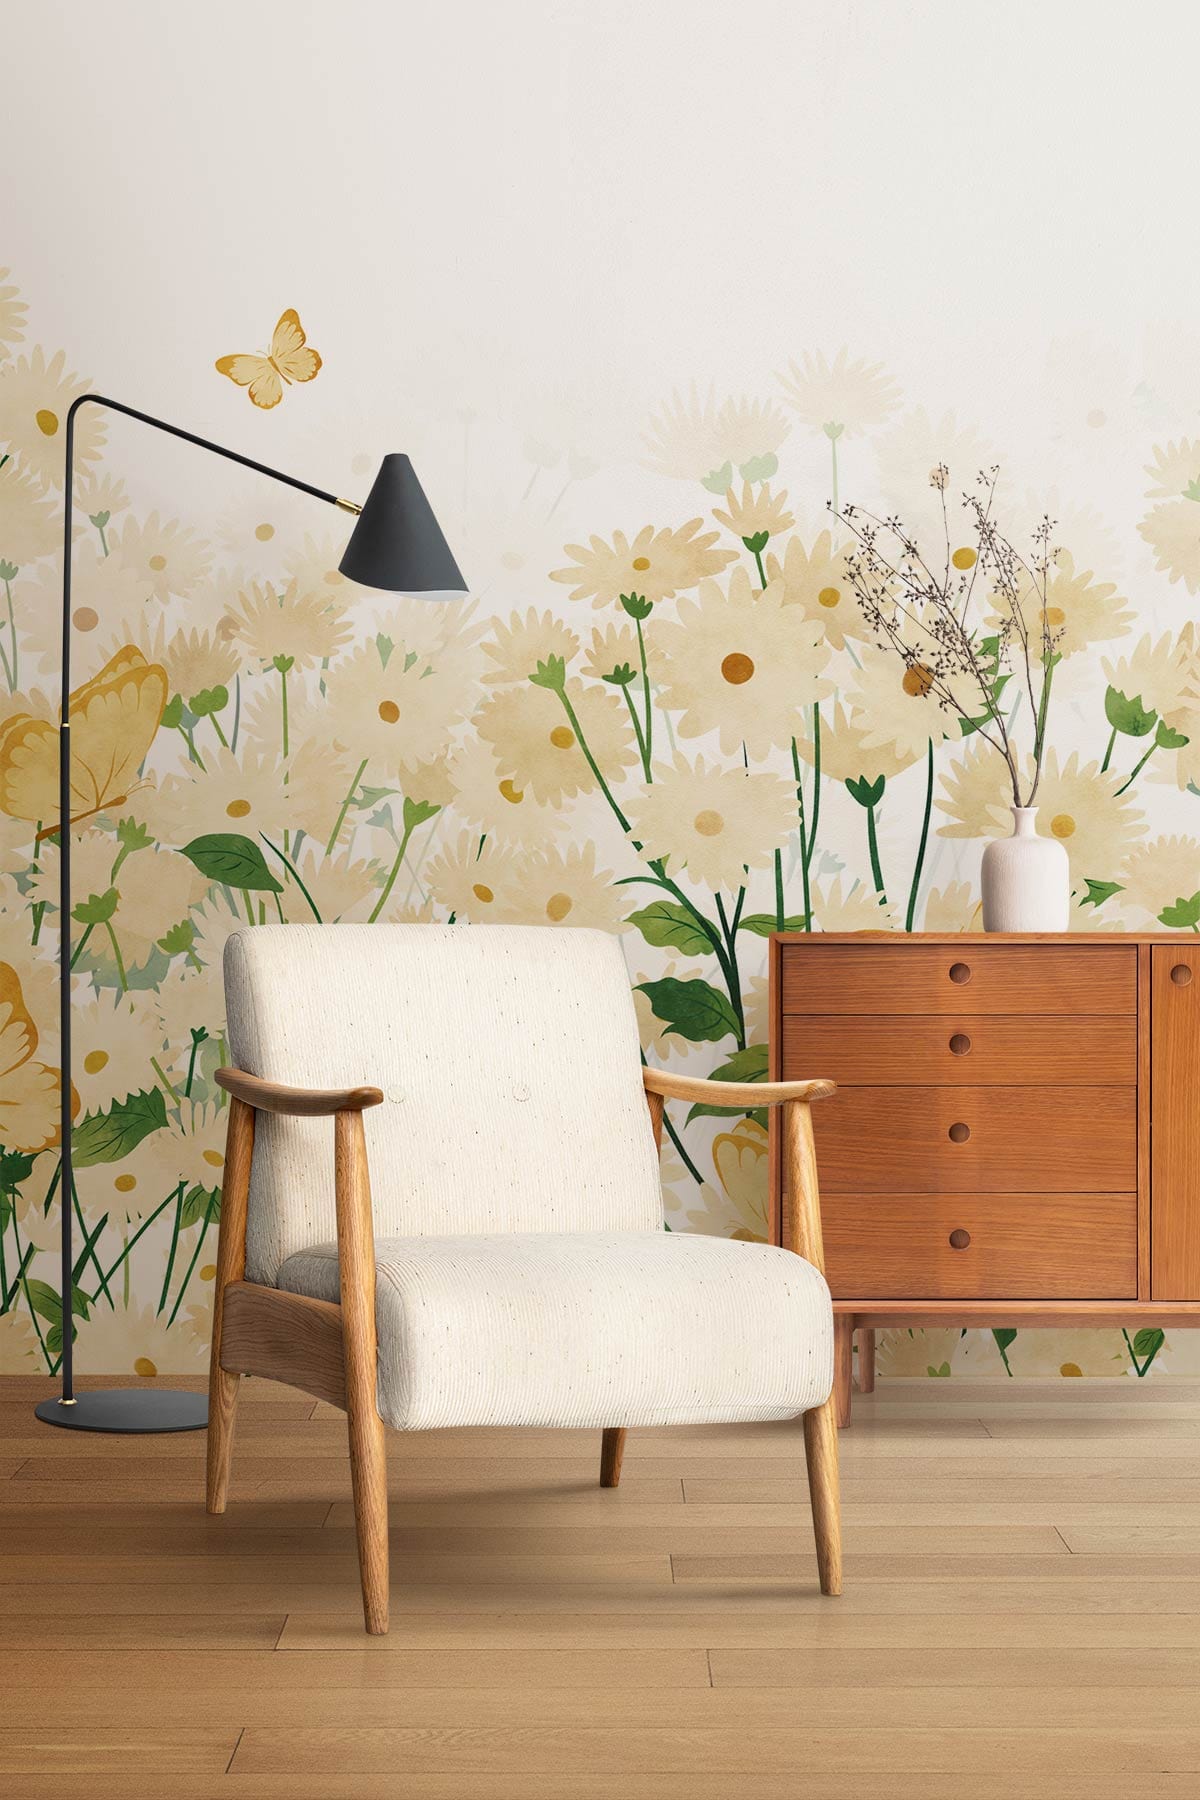 Decorative Dassie and Butterfly Wallpaper Mural for an Interior Hallway